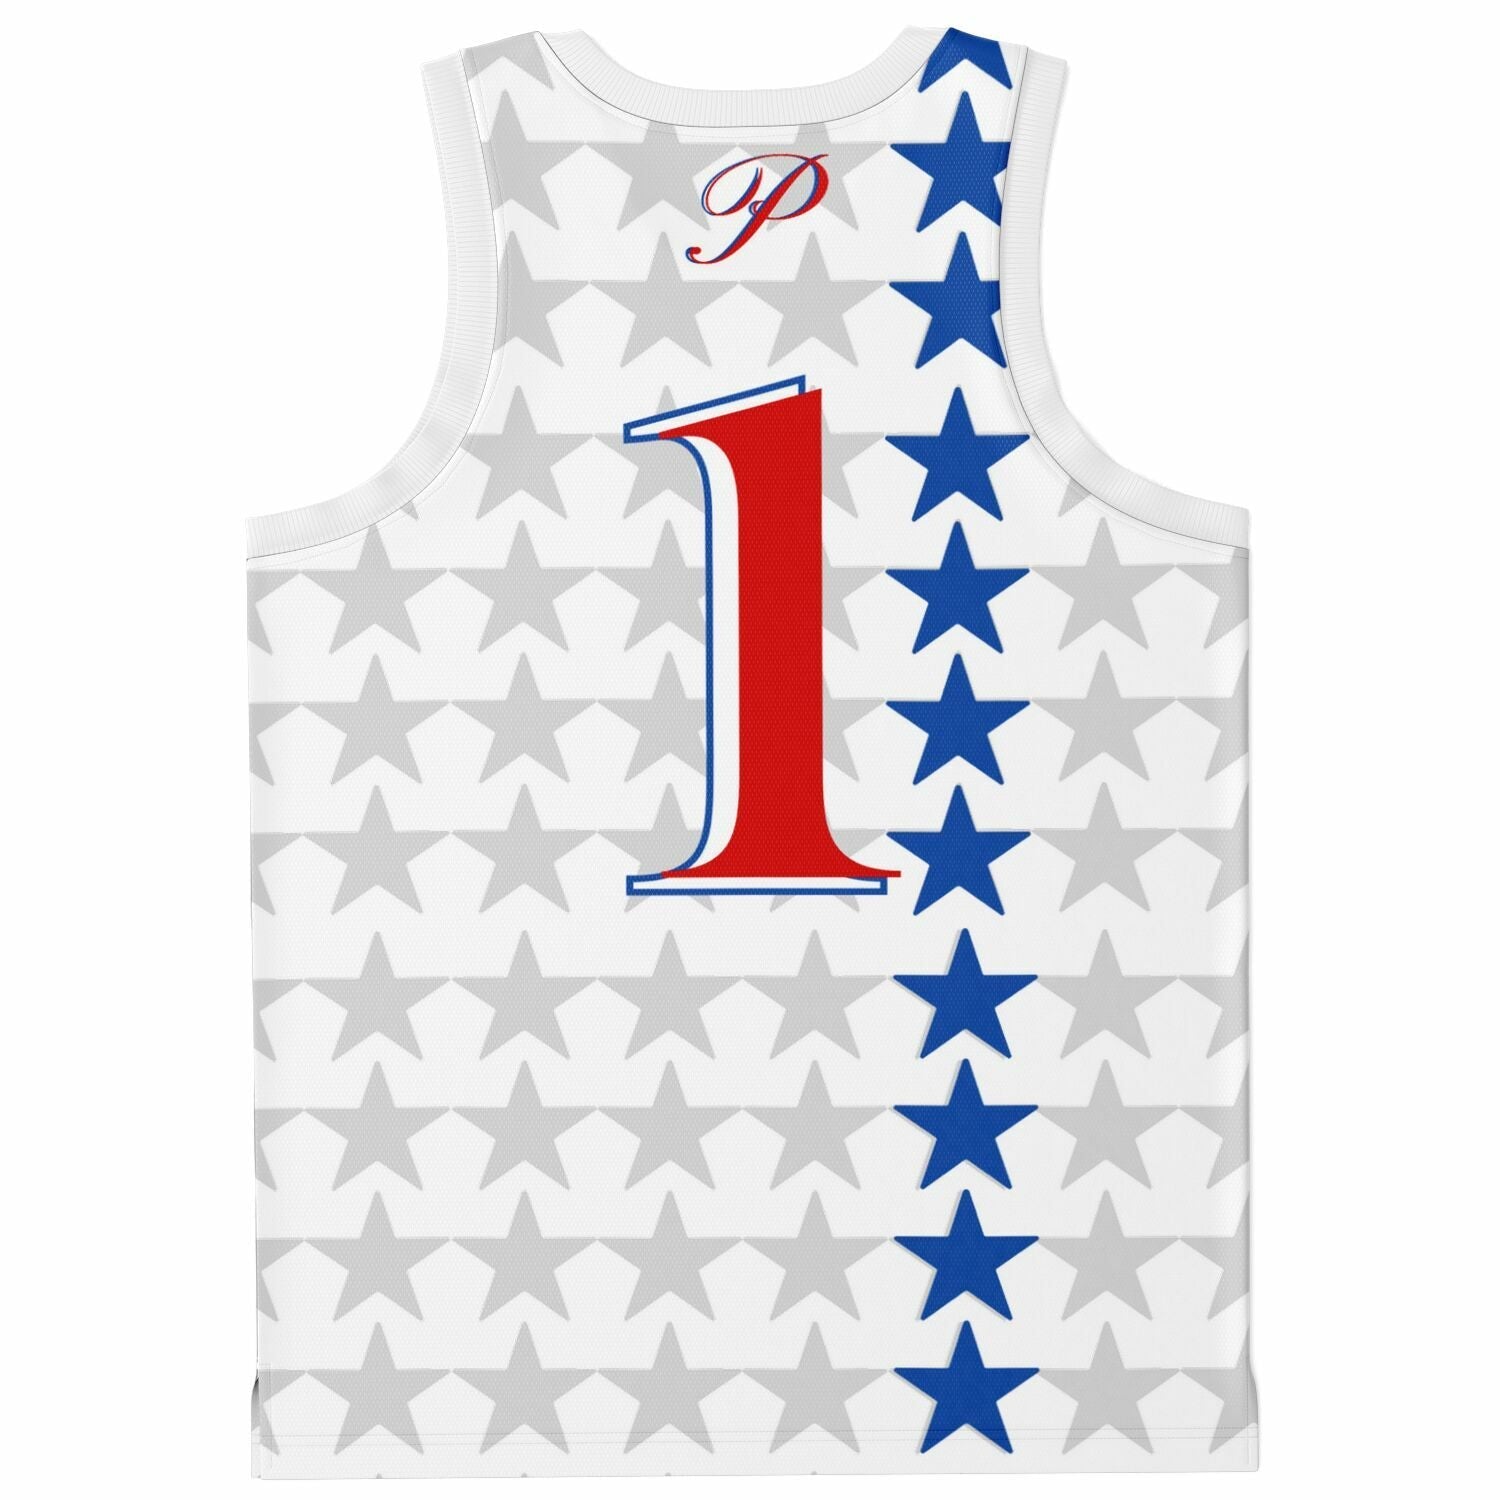 Basketball Jersey Rib - AOP Courtside classic all star edition jersey